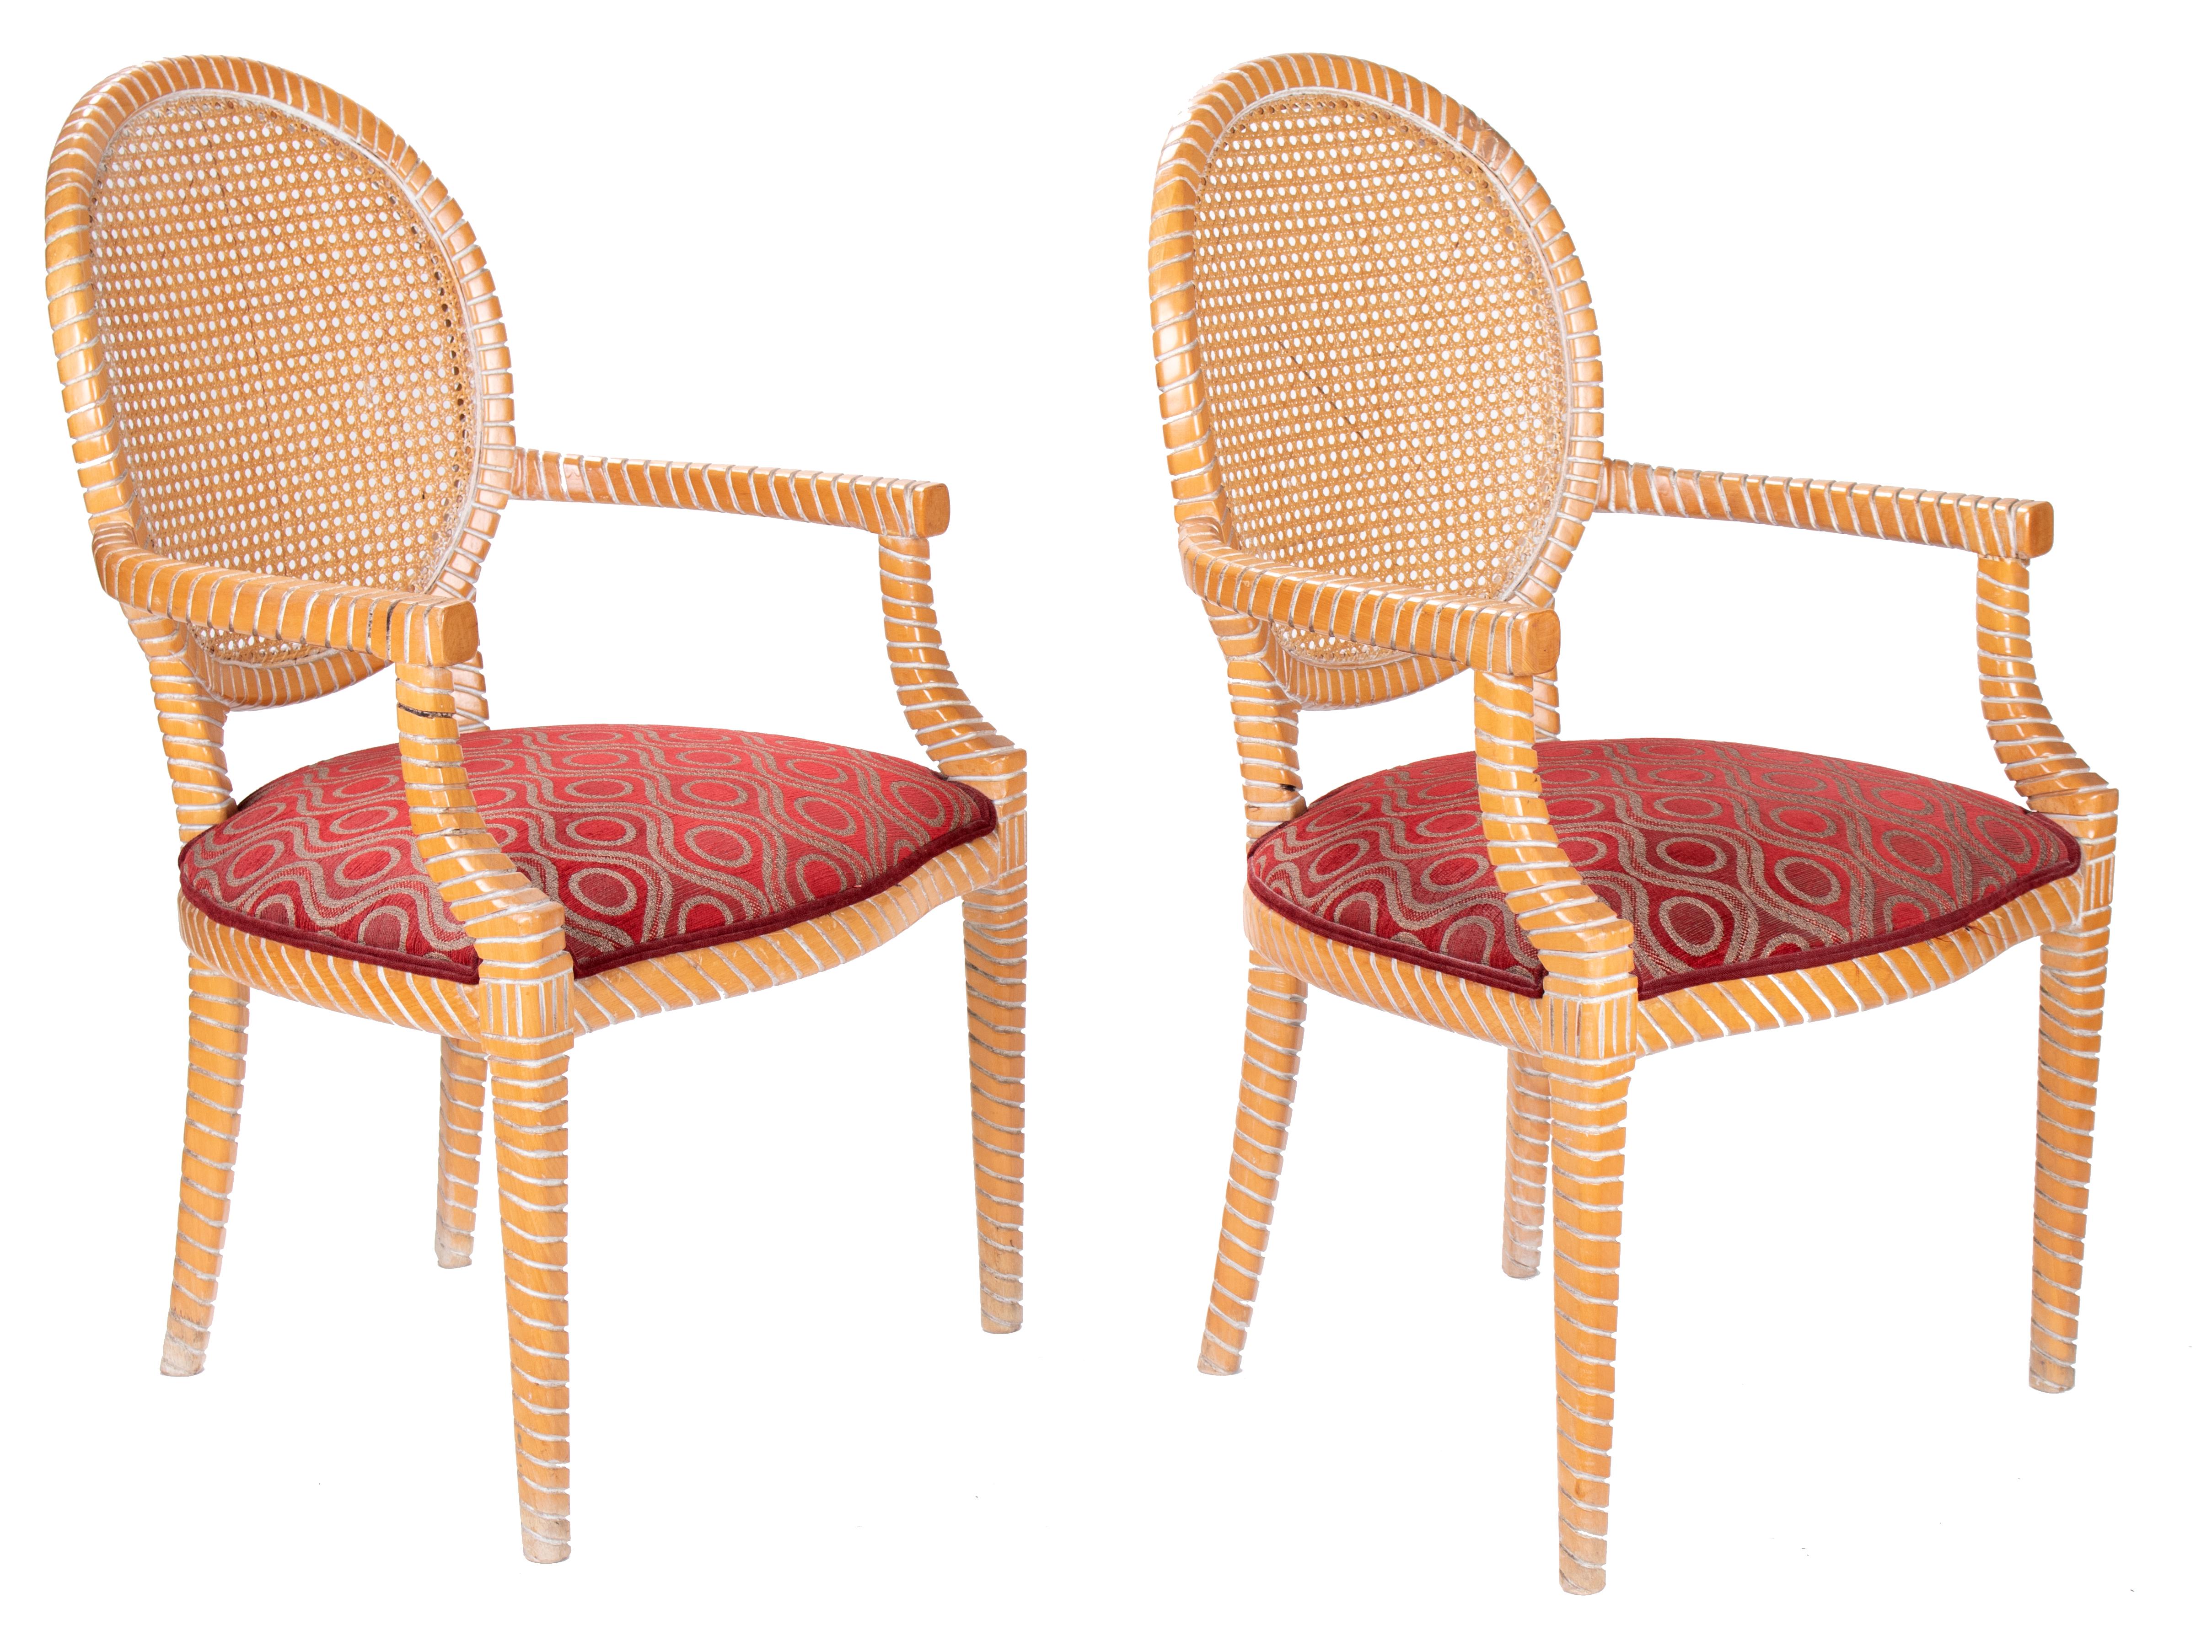 1980s pair of Spanish hand carved armchairs with wicker decorated backrest.